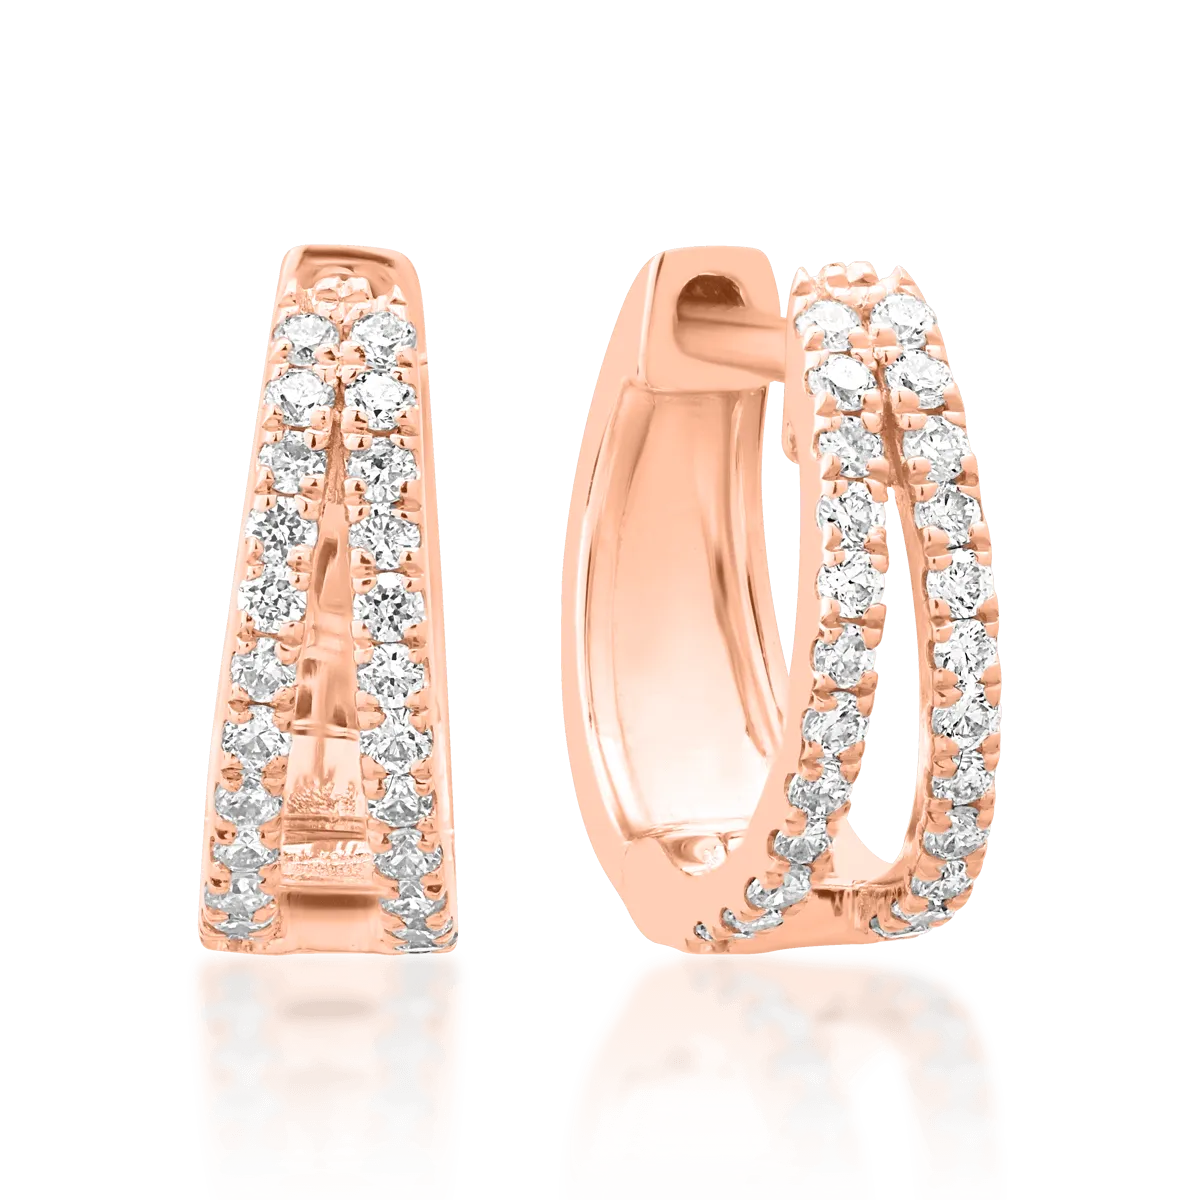 14K rose gold earrings with 0.168ct diamonds